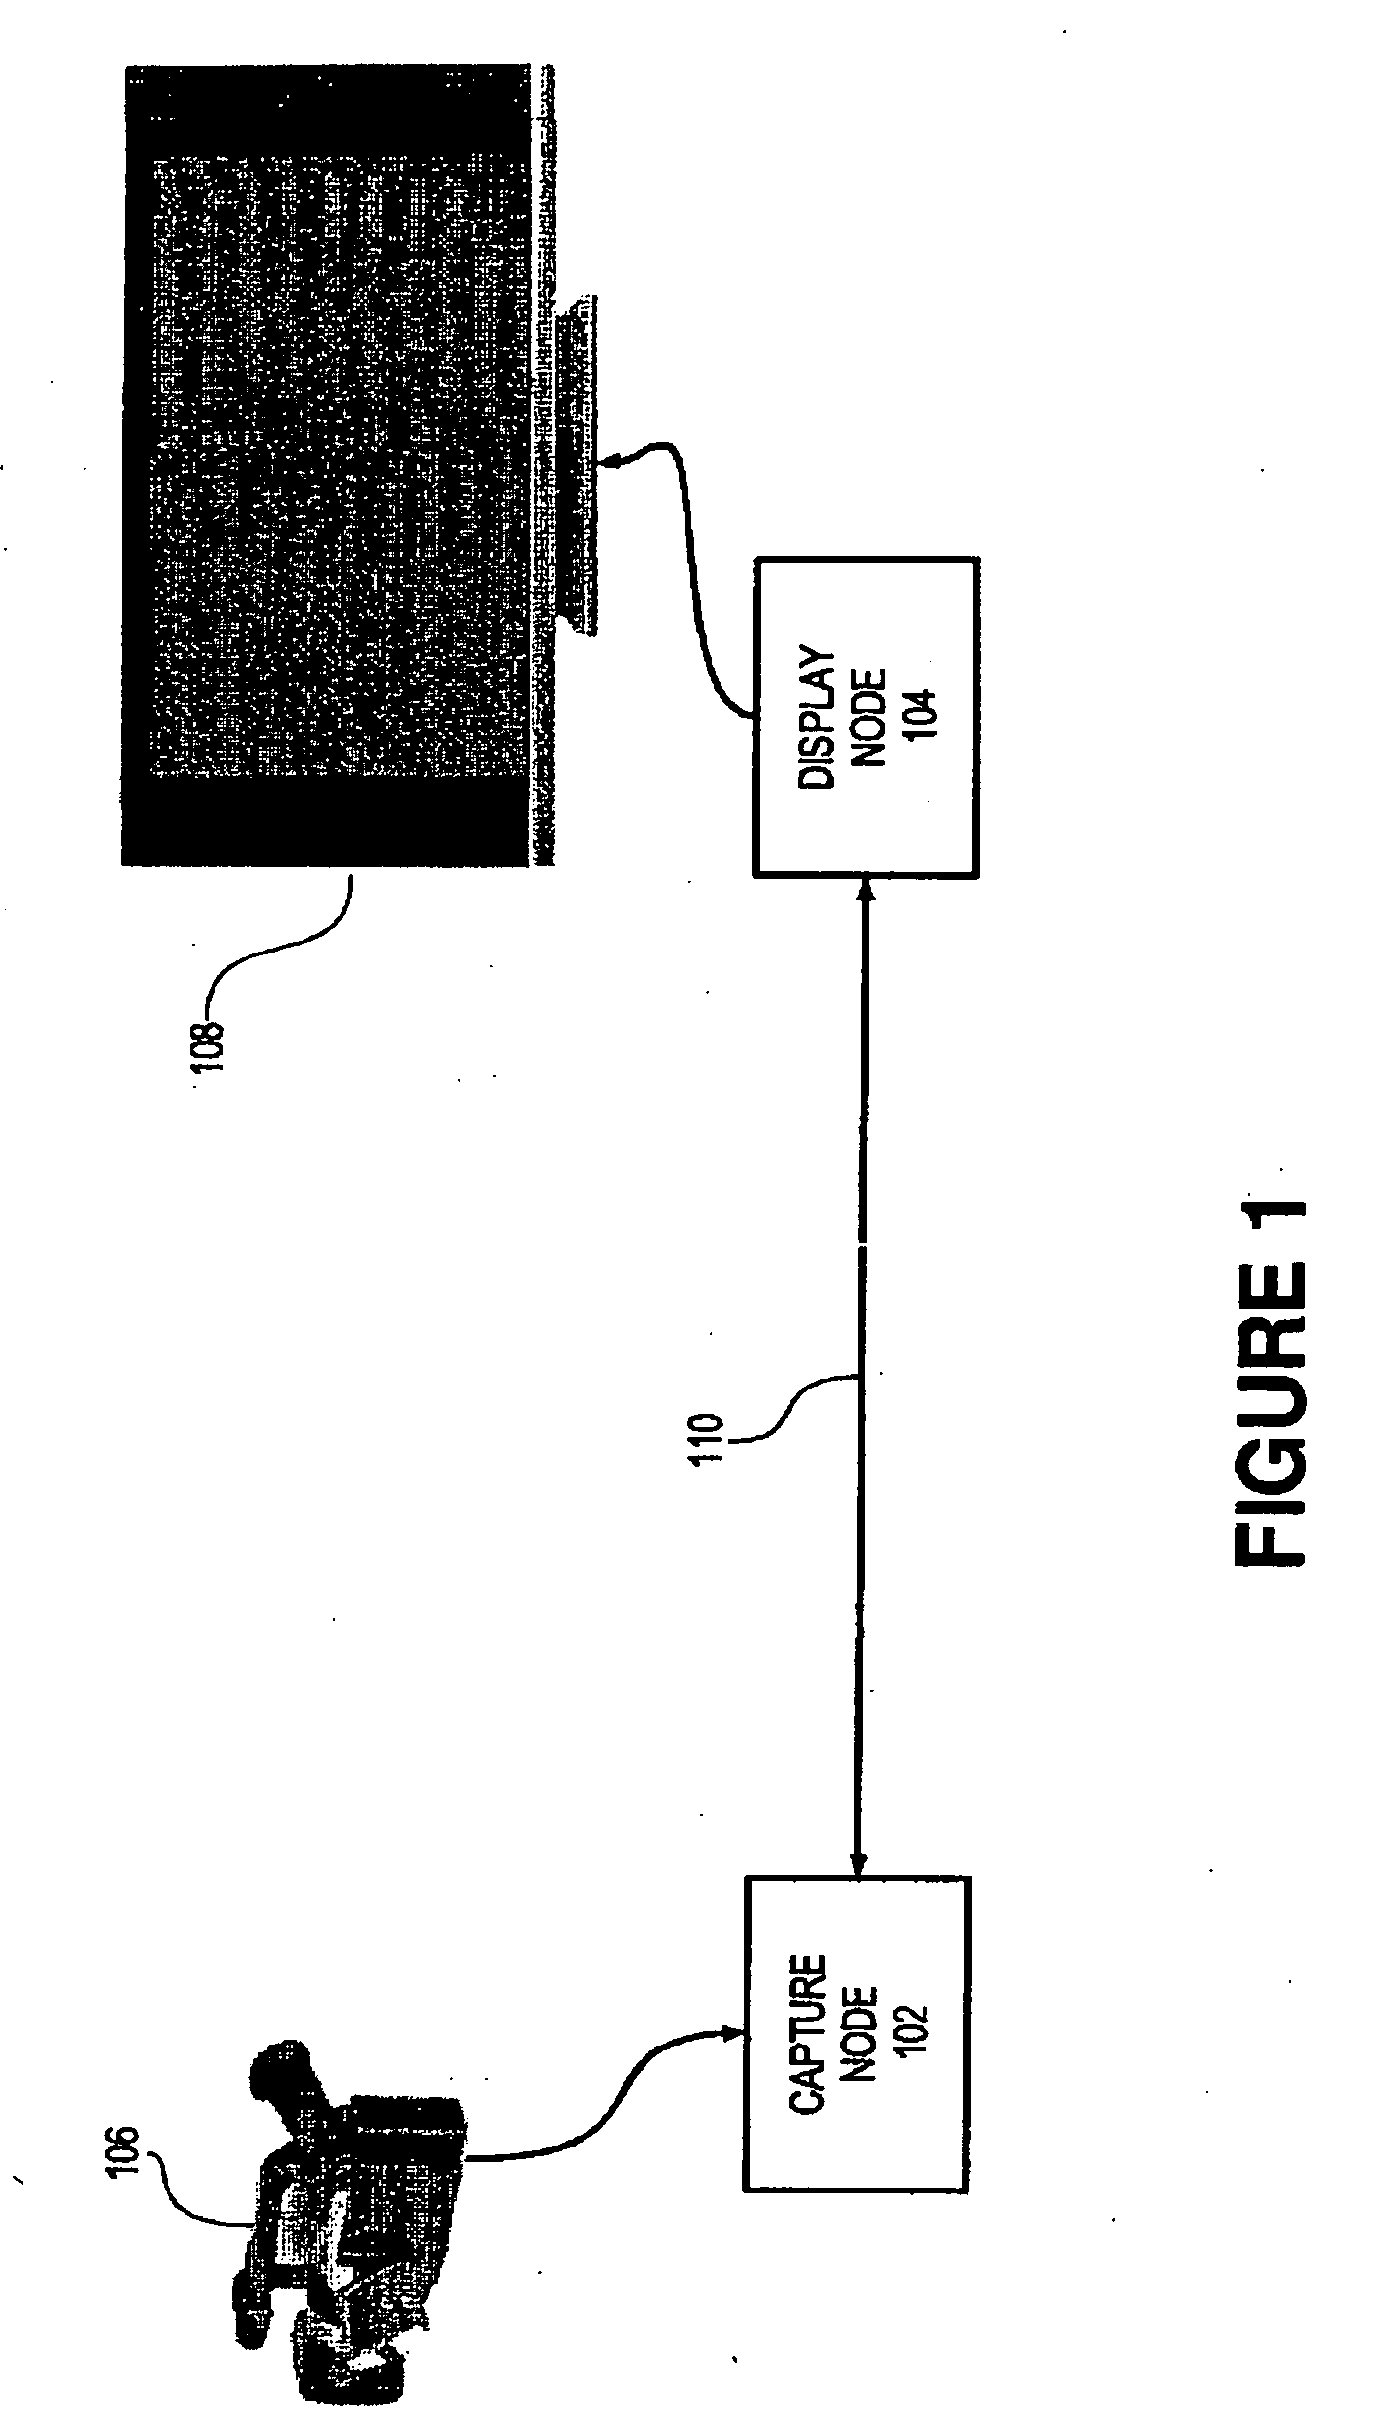 Capture node for use in an audiovisual signal routing and distribution system